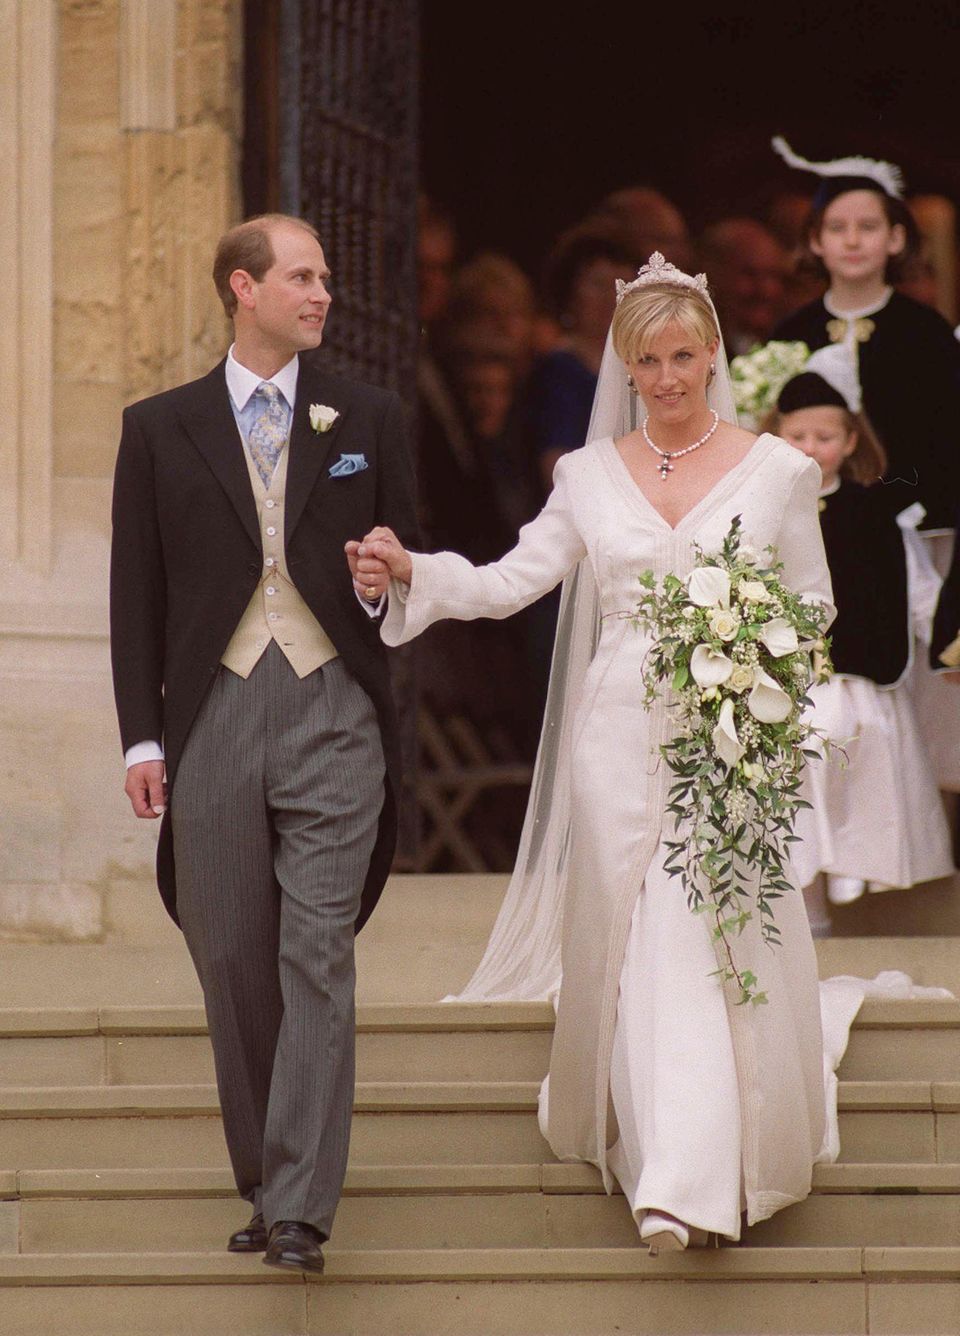 Prince Edward and Sophie Rhys-Jones tied the knot on June 19, 1999 in St George's Chapel at Windsor Castle. 